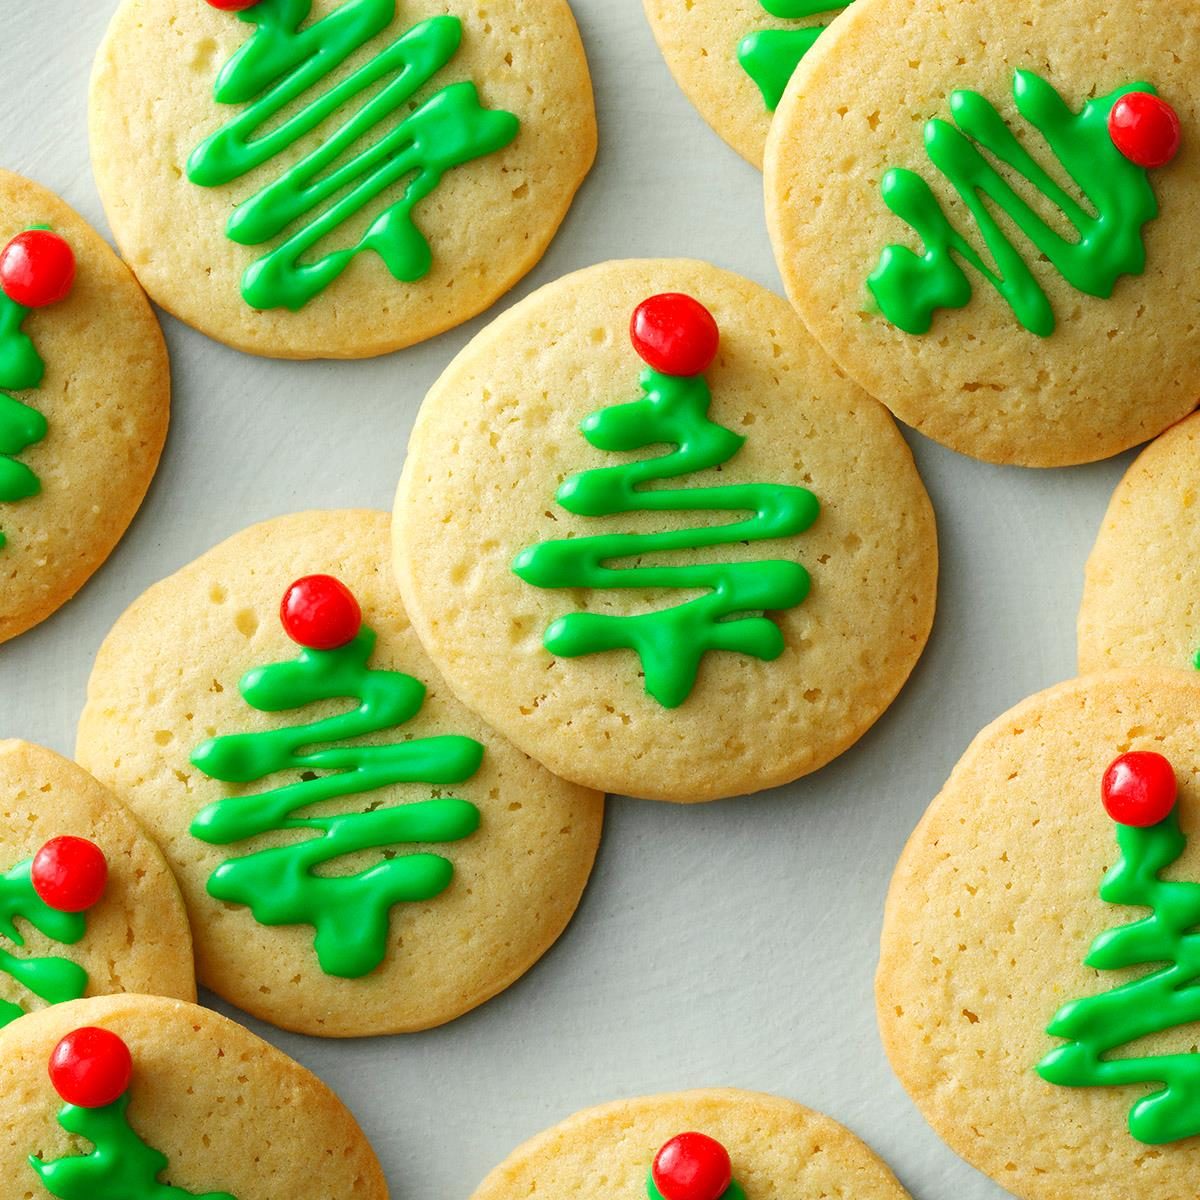 7 Fun and Tasty Christmas Cookie Gift Ideas for Kids